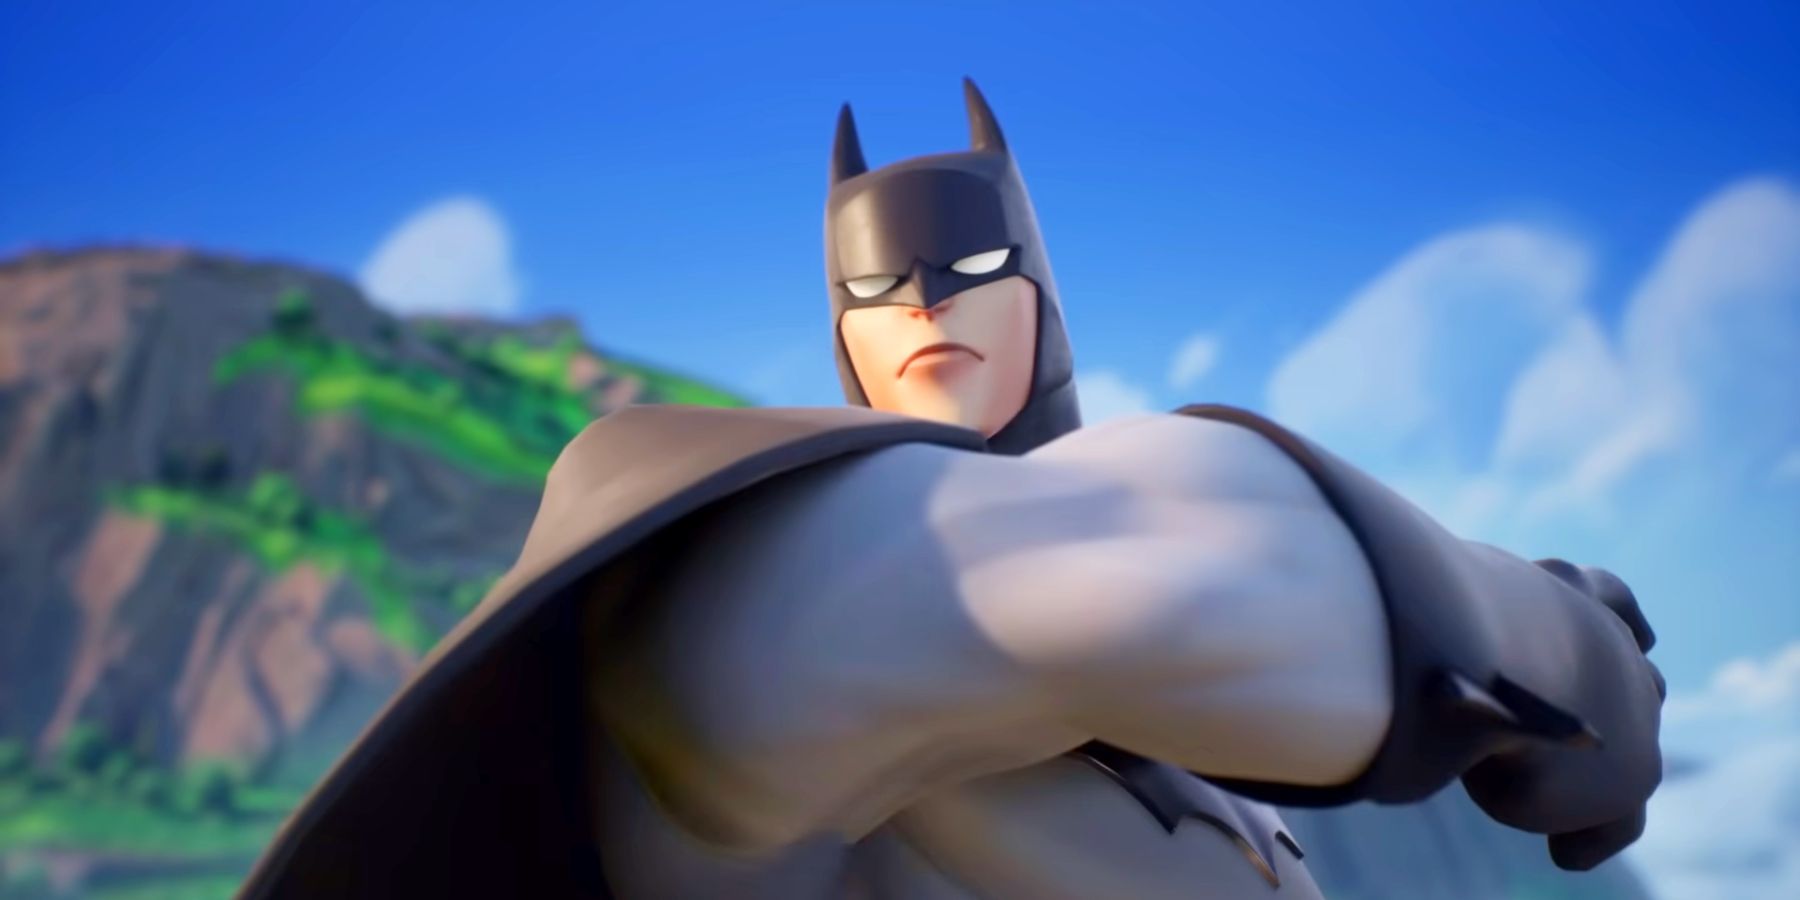 Every skin available for Batman in MultiVersus' open beta.